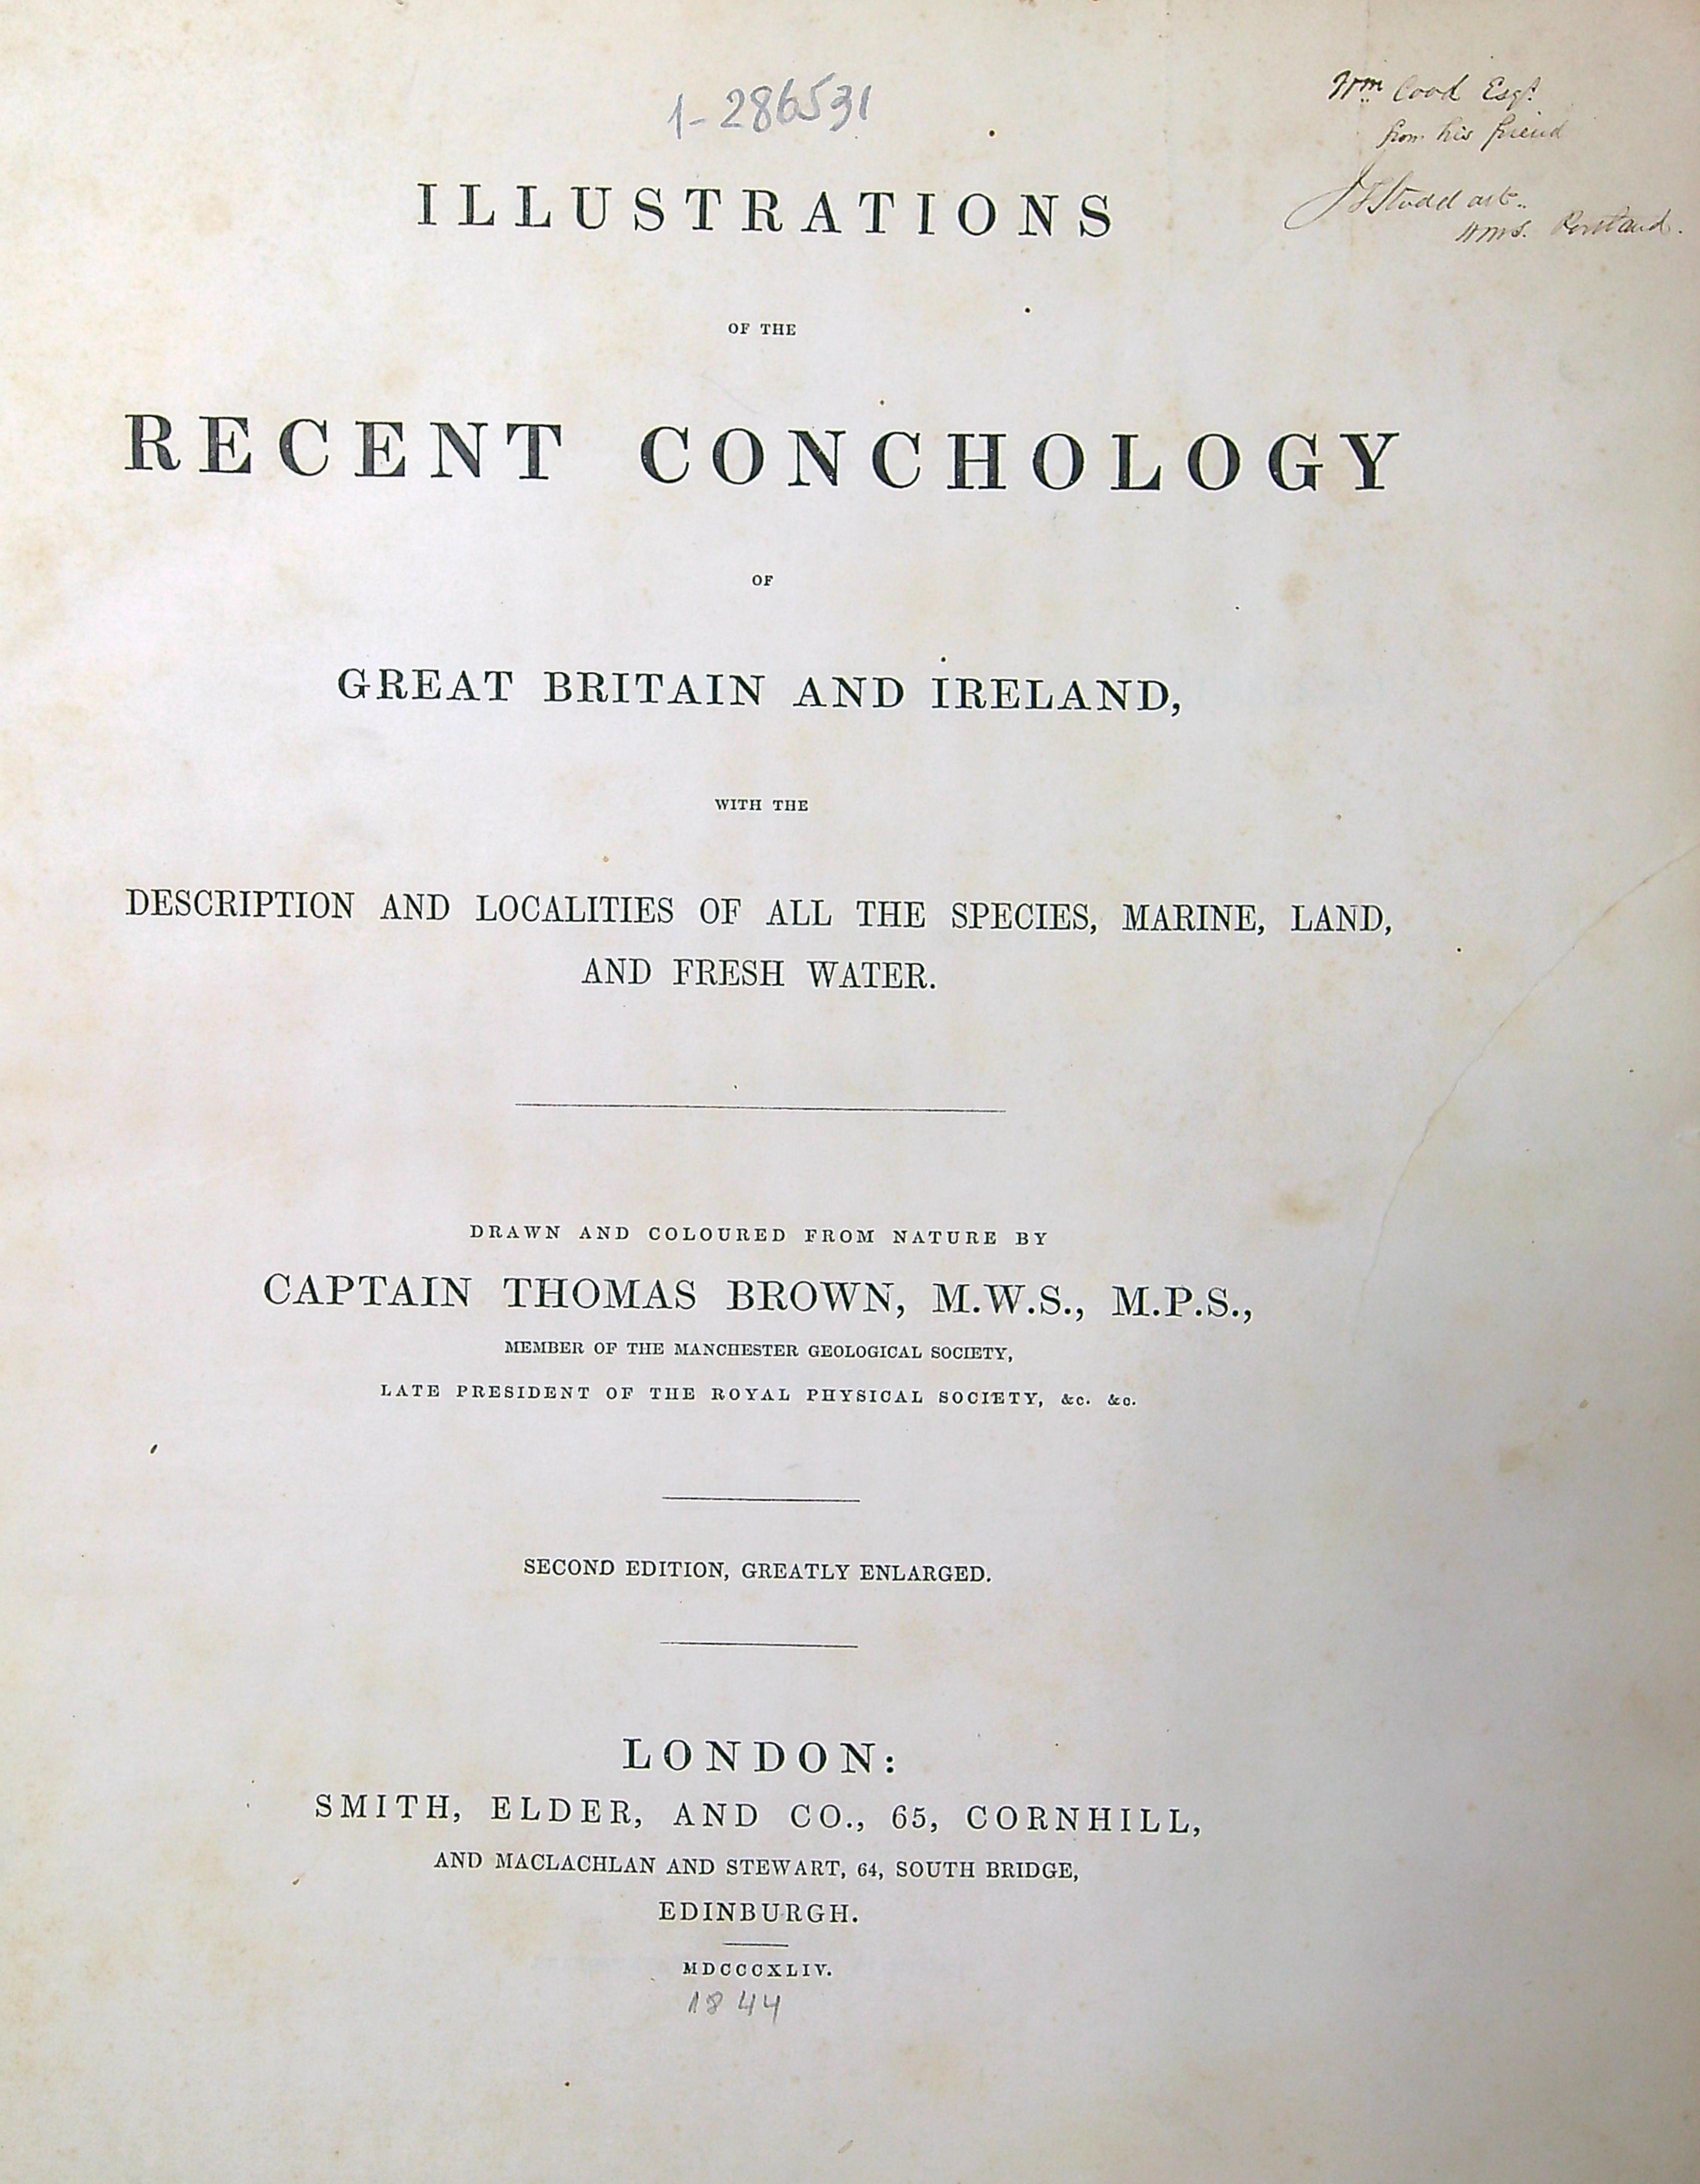 Cubierta para Illustrations of the recent conchology of Great Britain and Ireland: with the description and localities of all the species, marine, land and fresh water